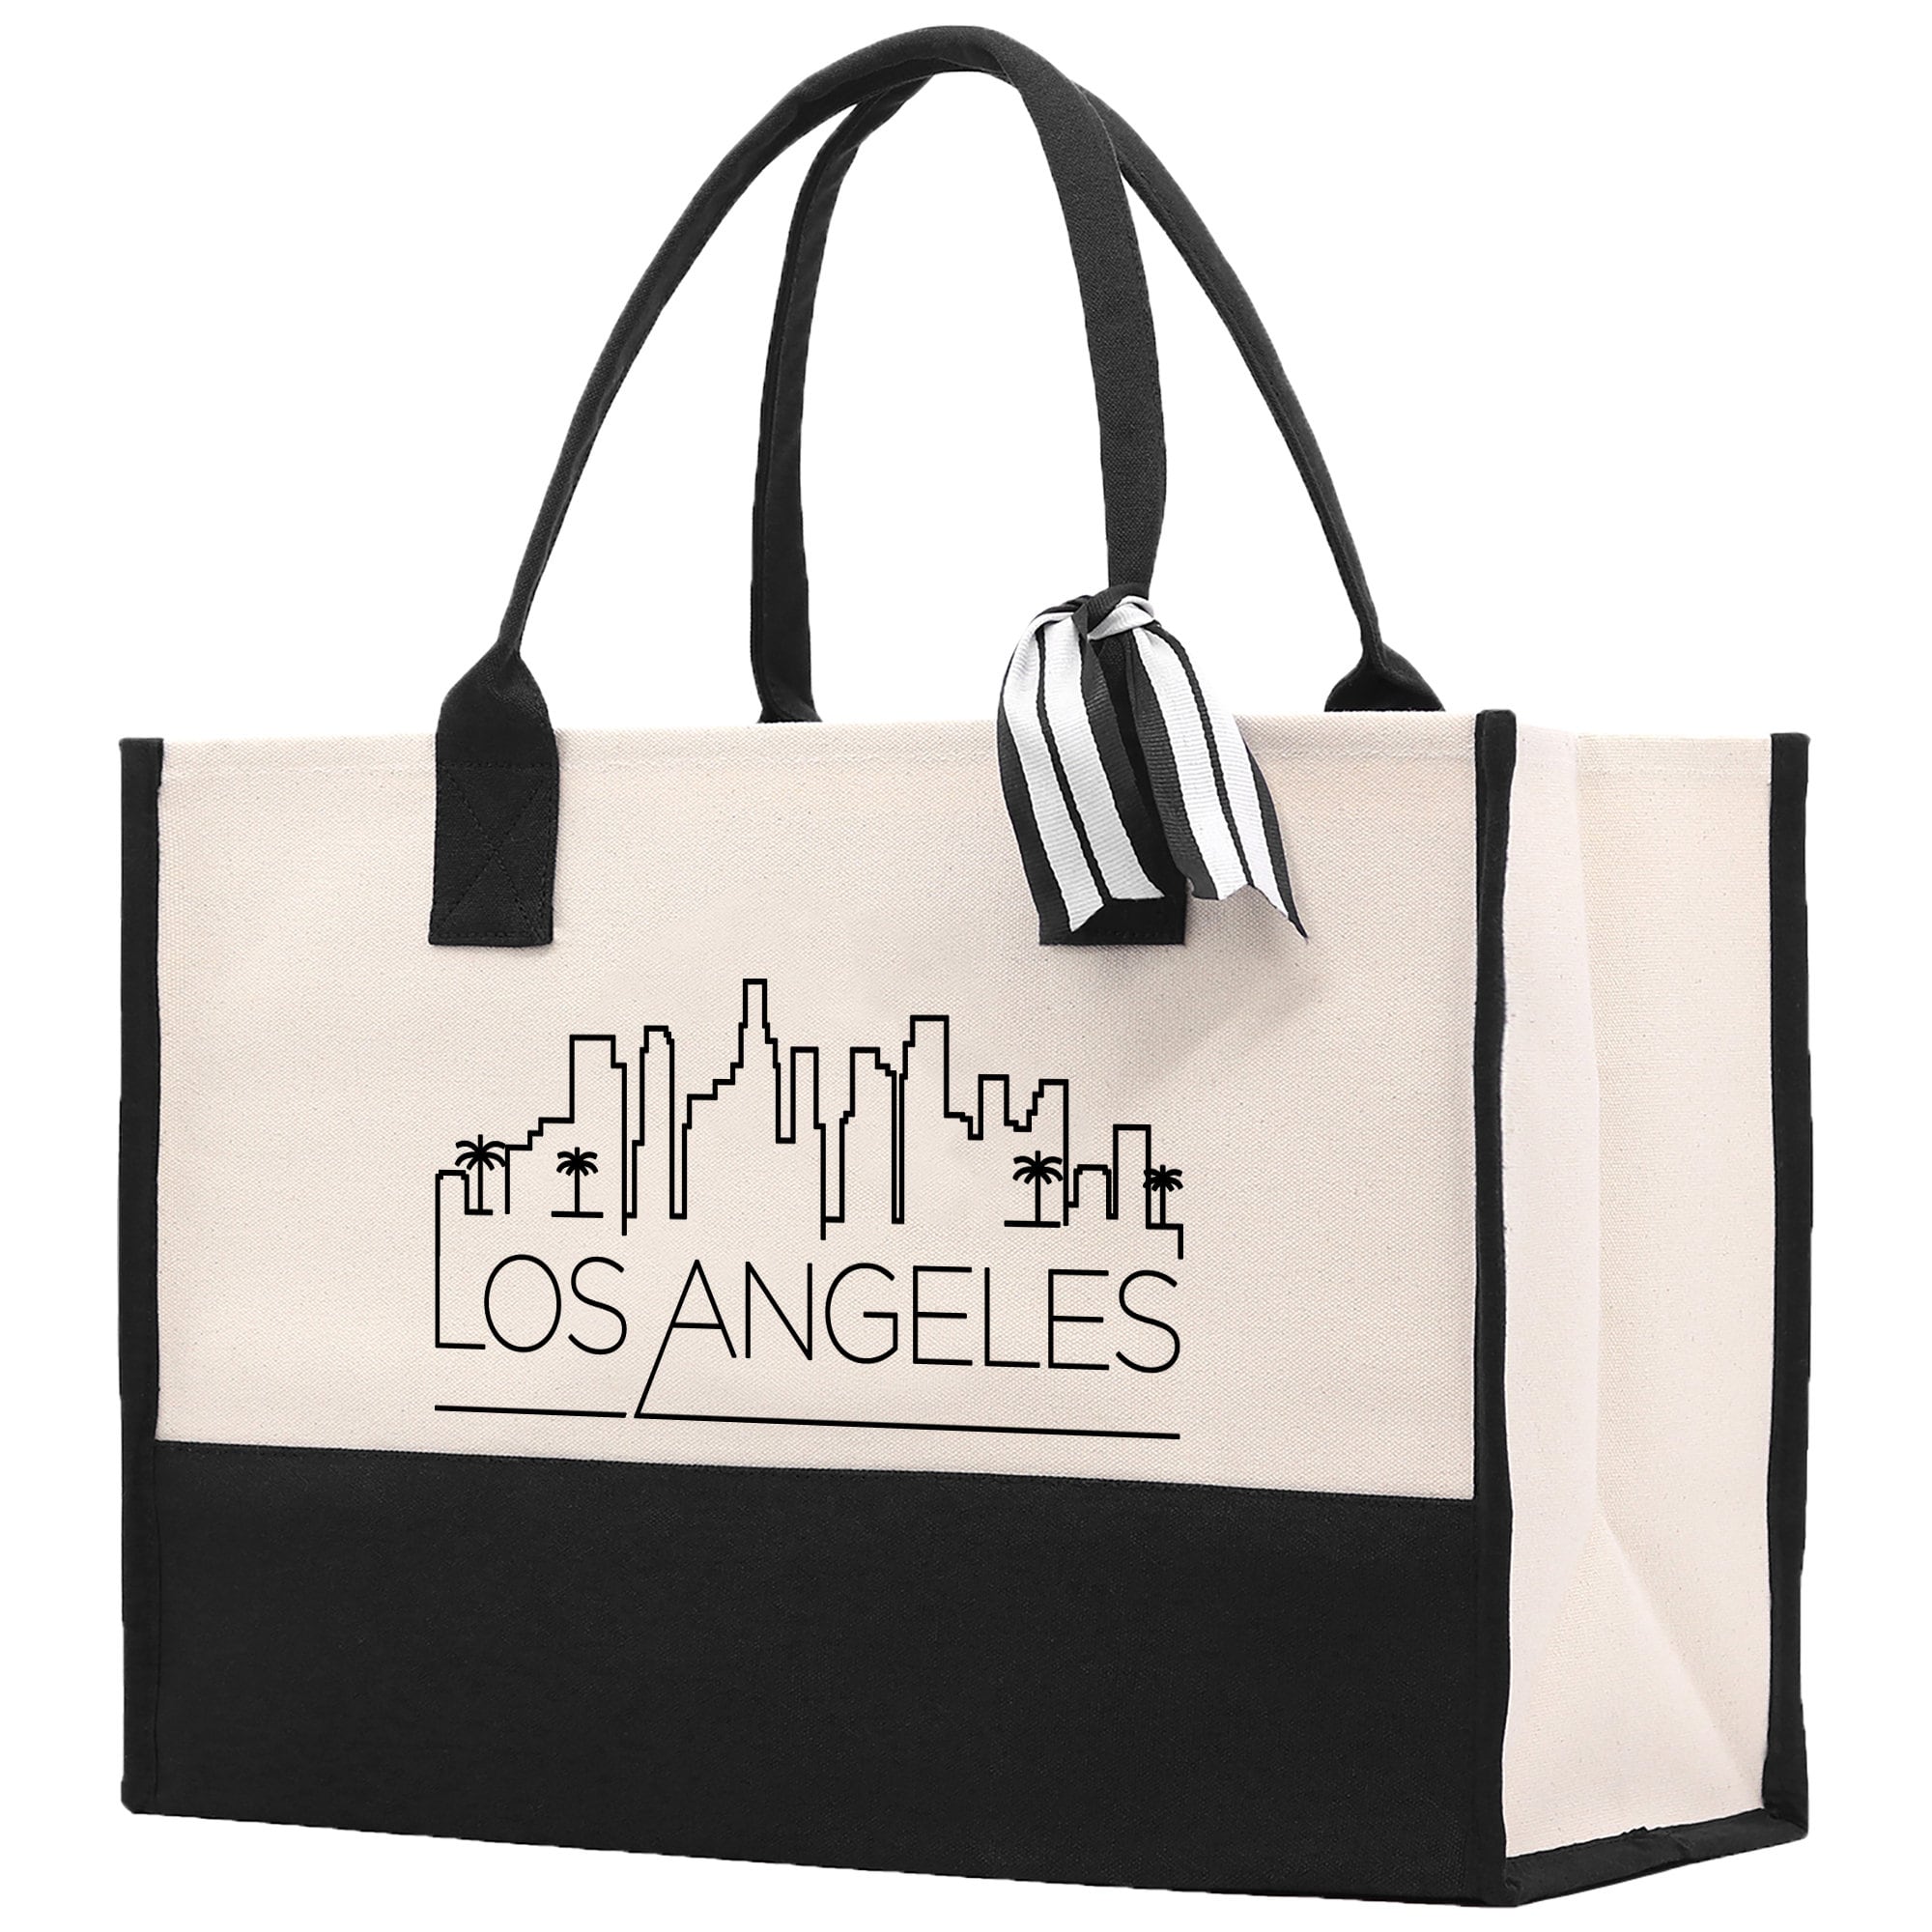 Los Angeles Cotton Canvas Tote Bag LA Travel Vacation Tote Employee and Client Gift Wedding Favor Birthday Welcome Tote Bag Bridesmaid Gift